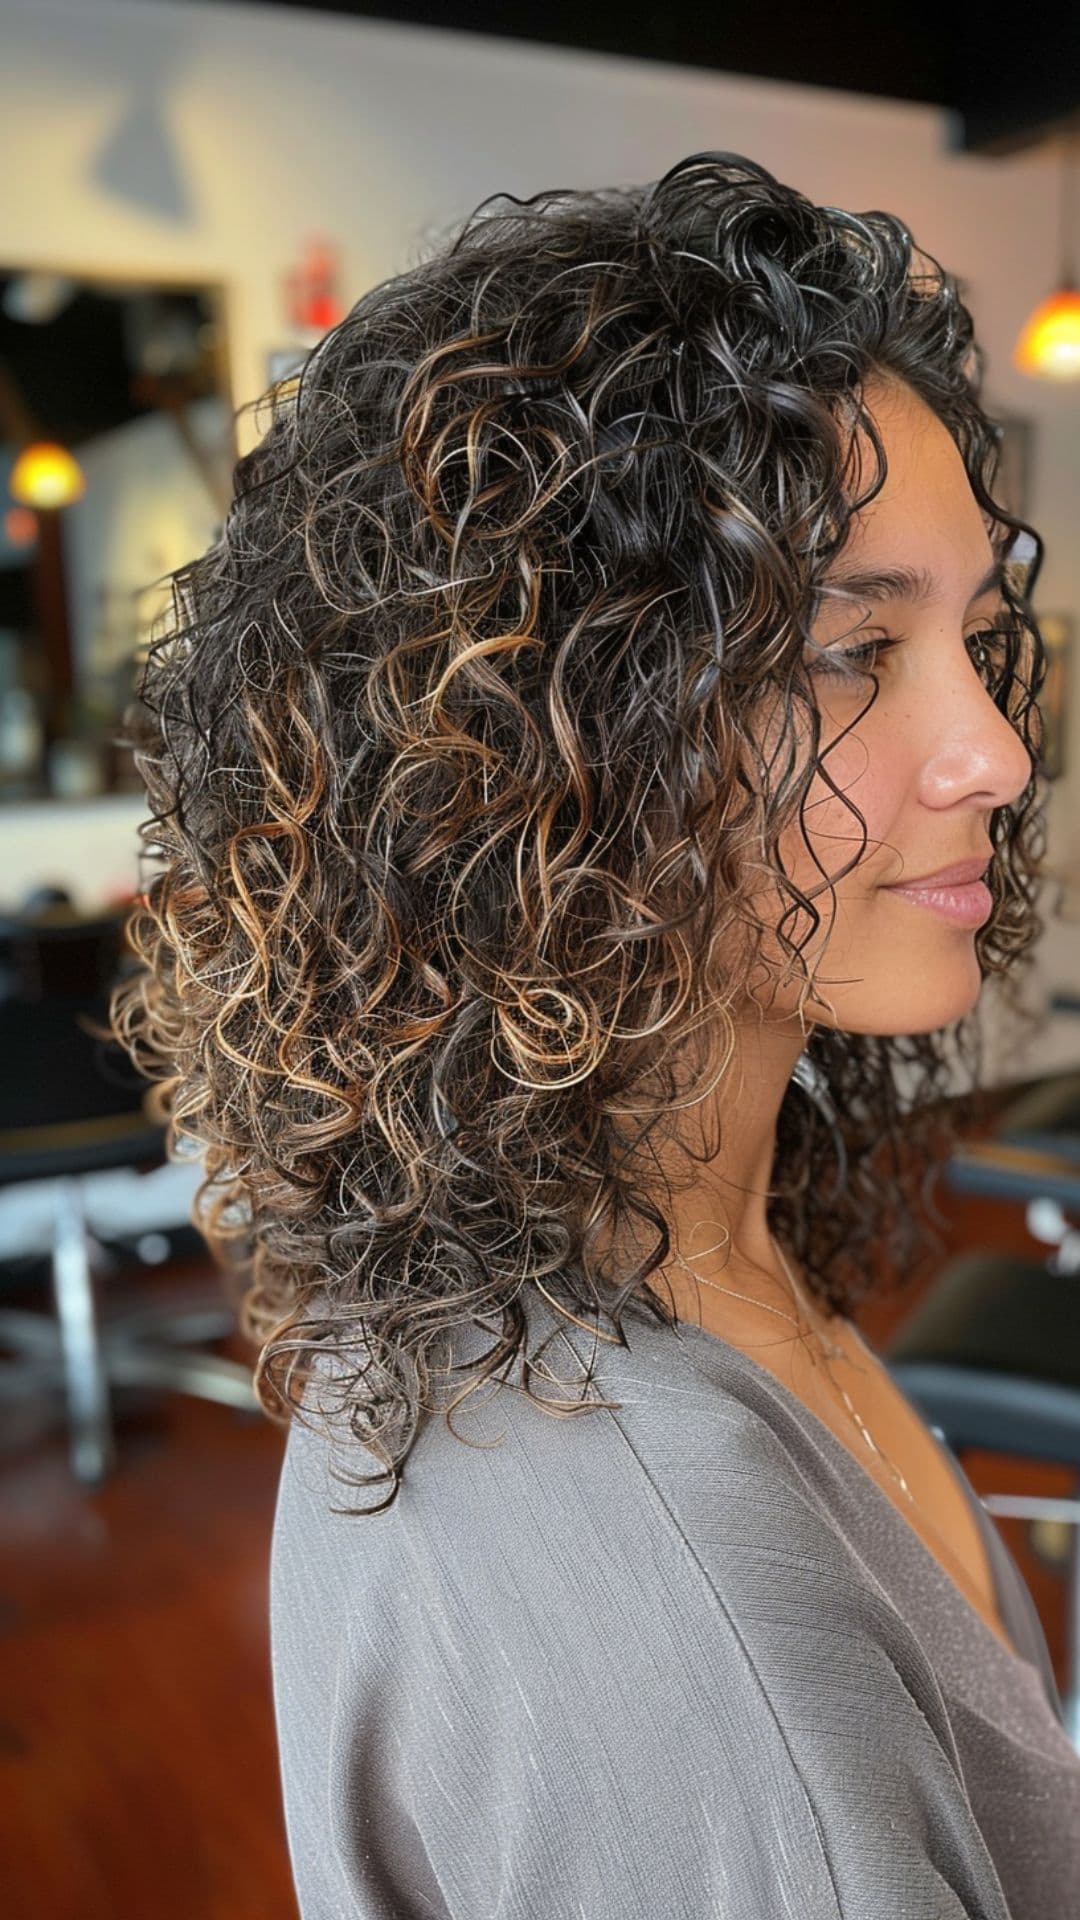 A woman modelling a caramel highlights on curly hair.